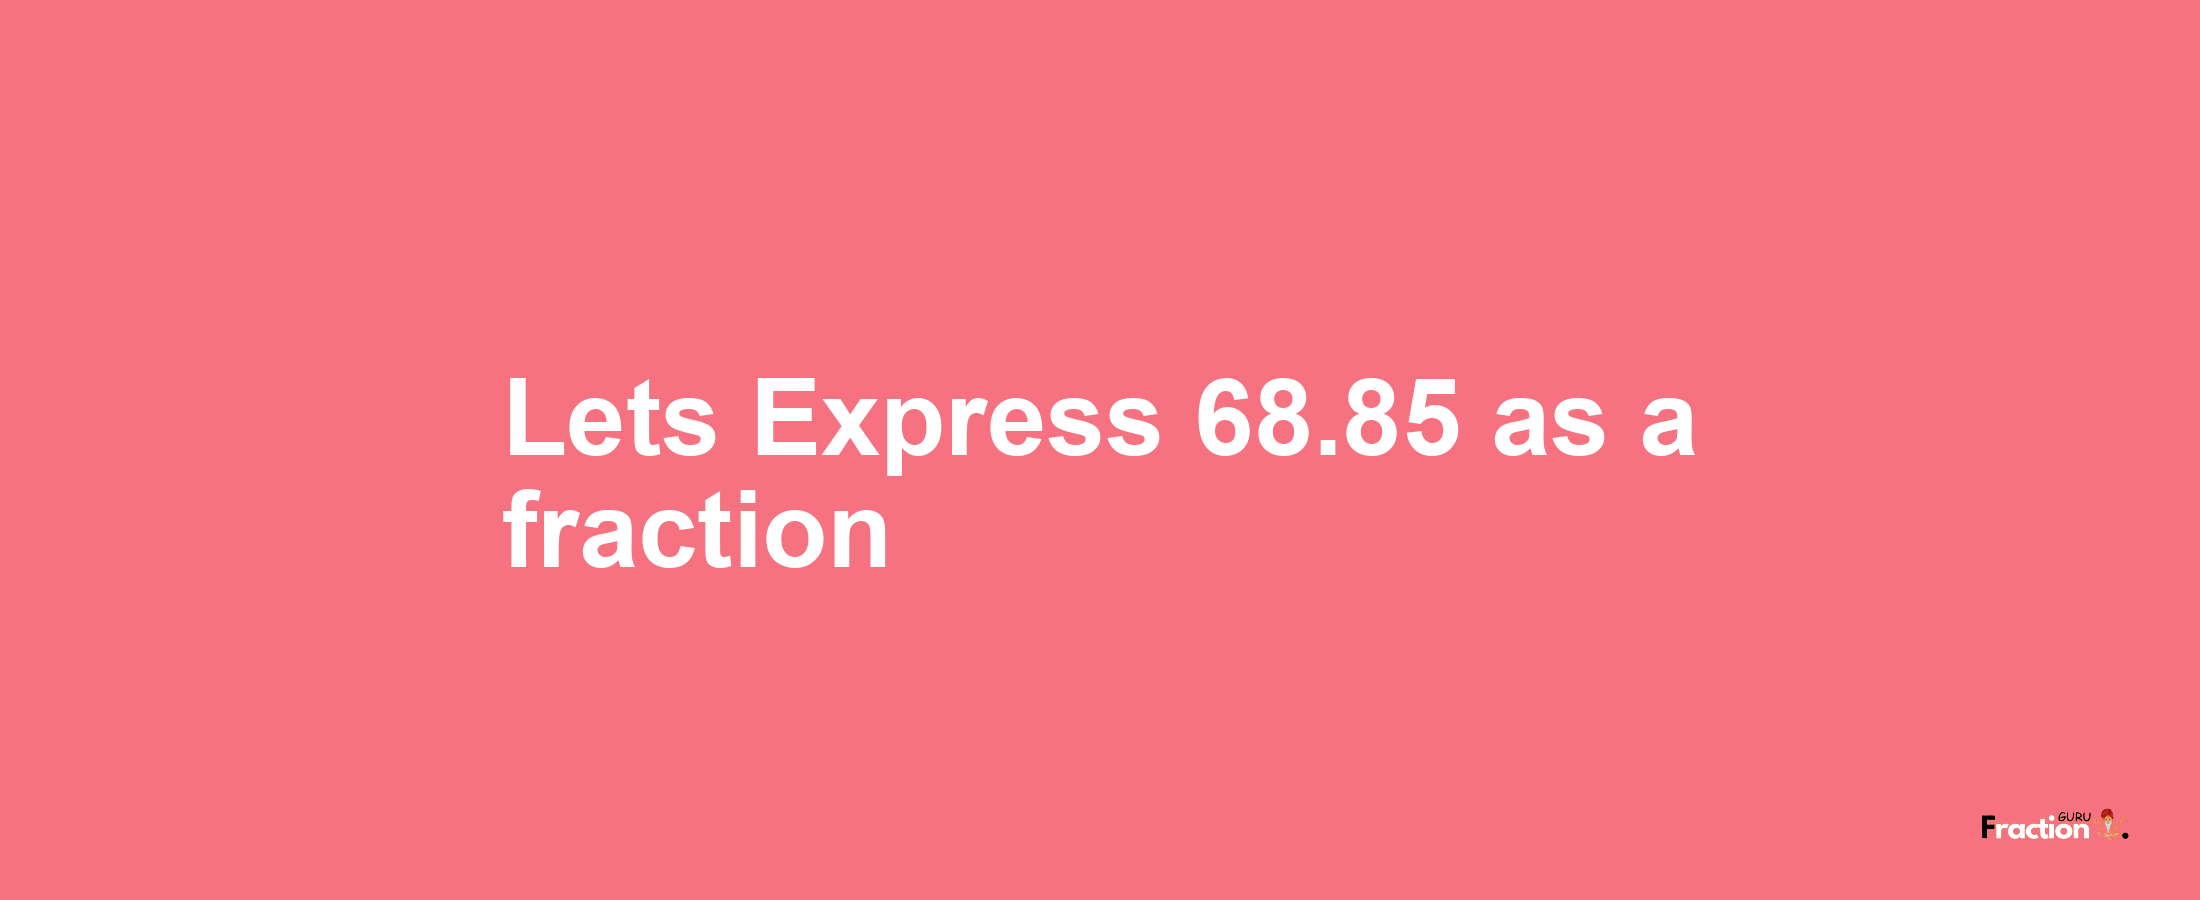 Lets Express 68.85 as afraction